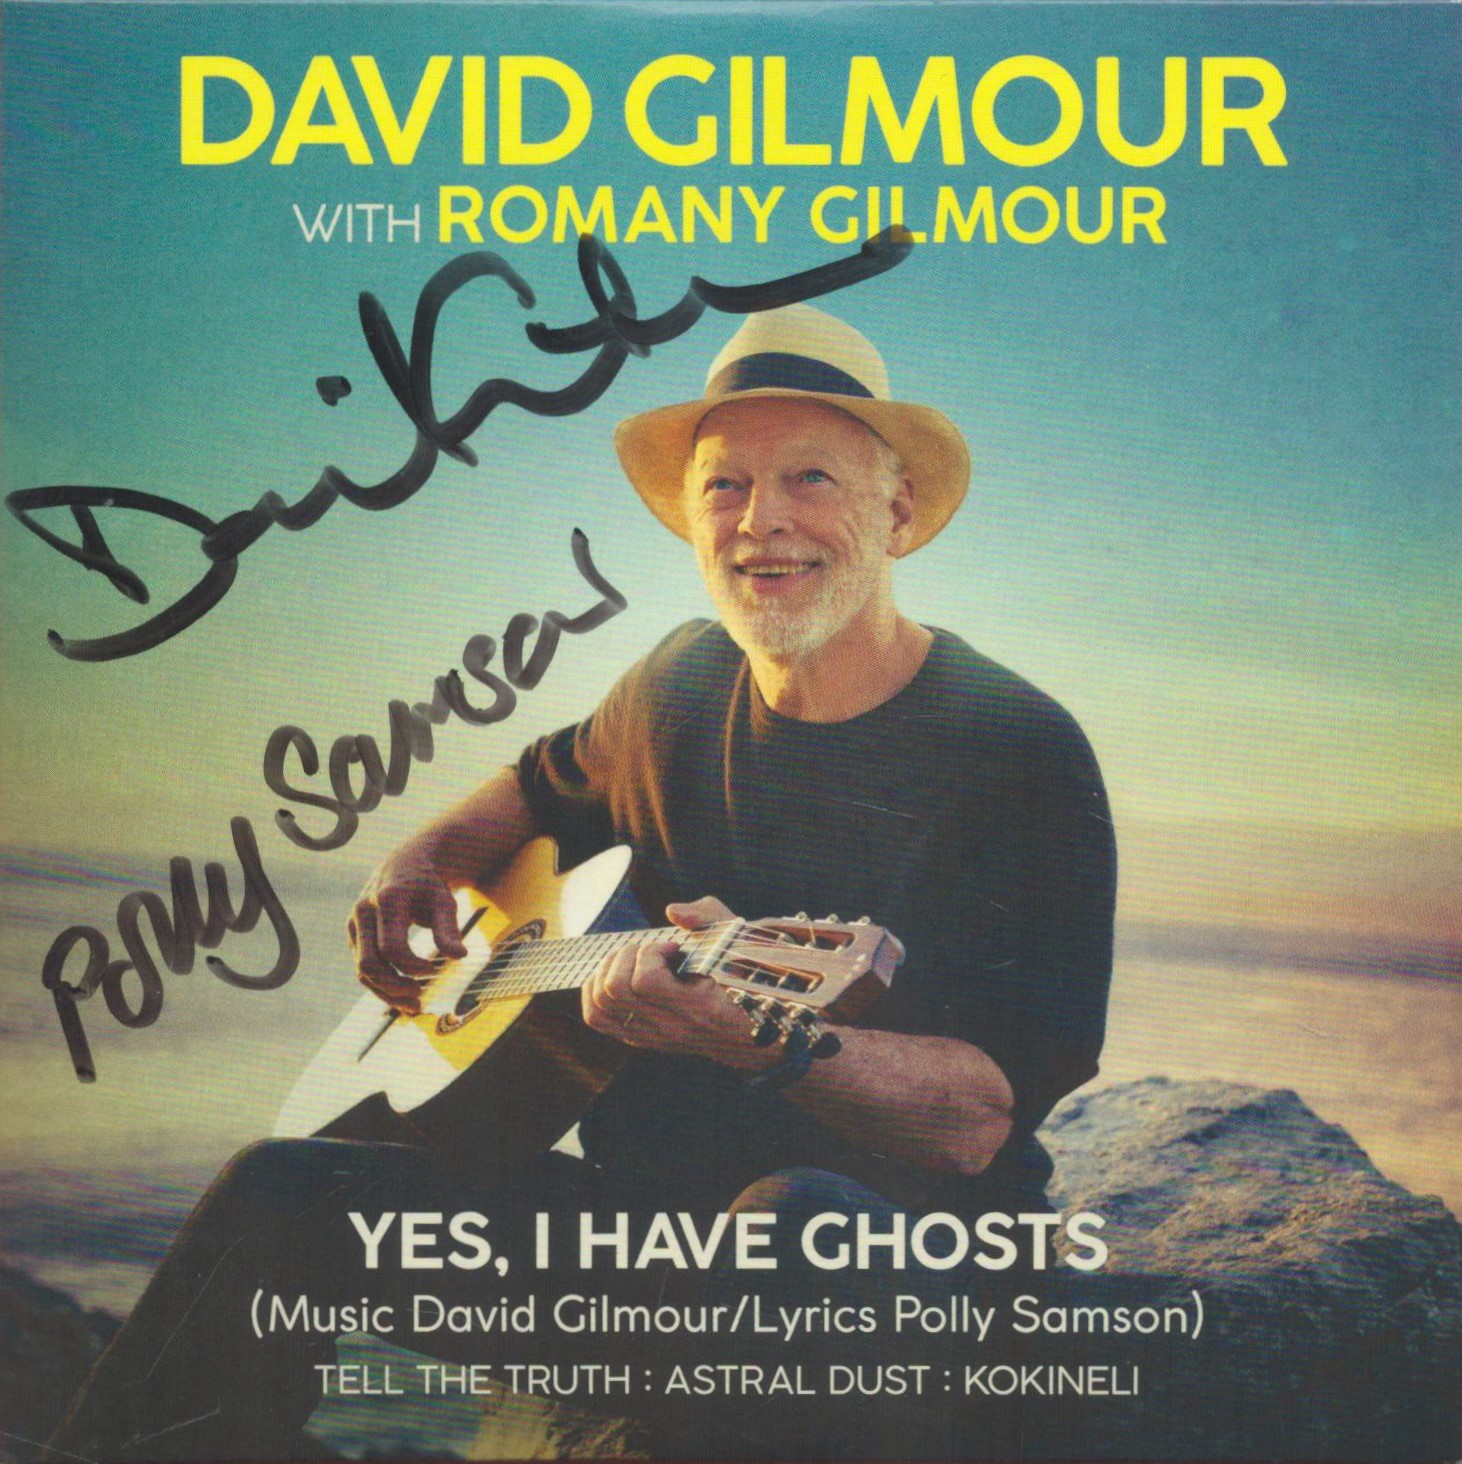 David Gilmour and Polly Samson signed CD sleeve for- Yes, I have Ghosts, with CD Plus, unsigned